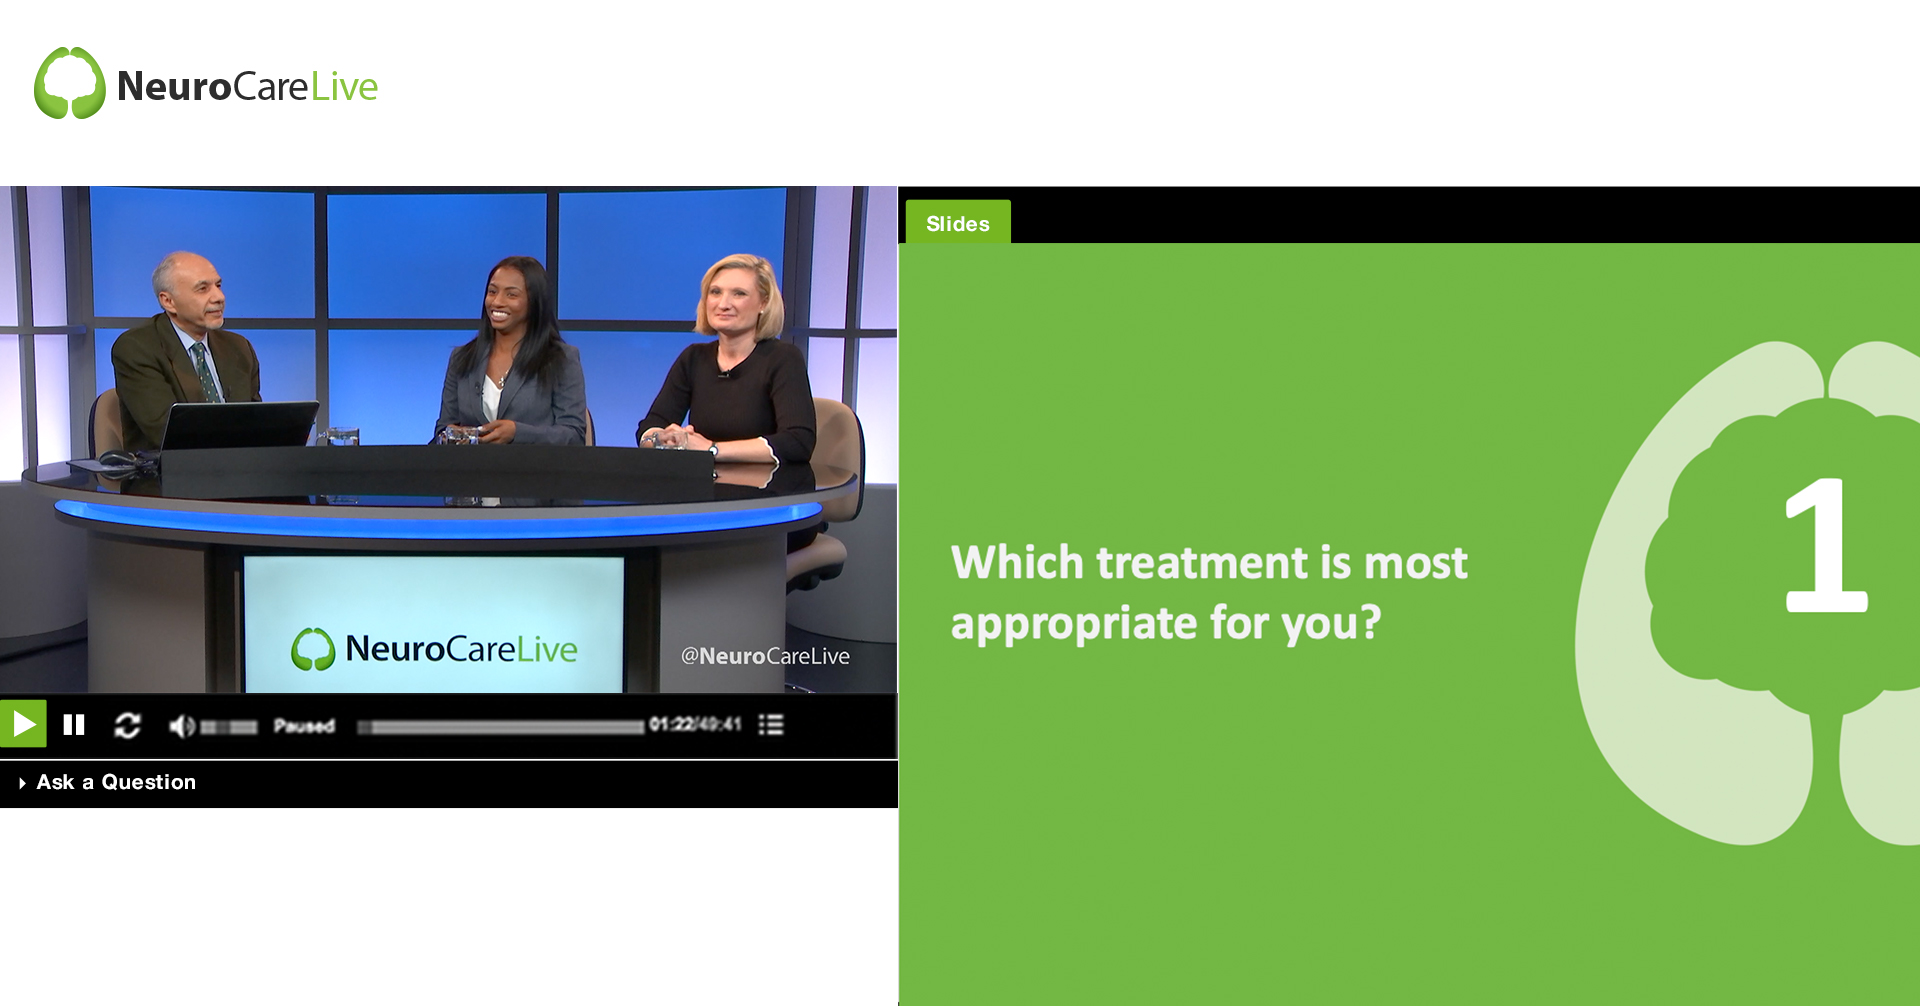 Chapter 1: Which treatment is most appropriate for you?